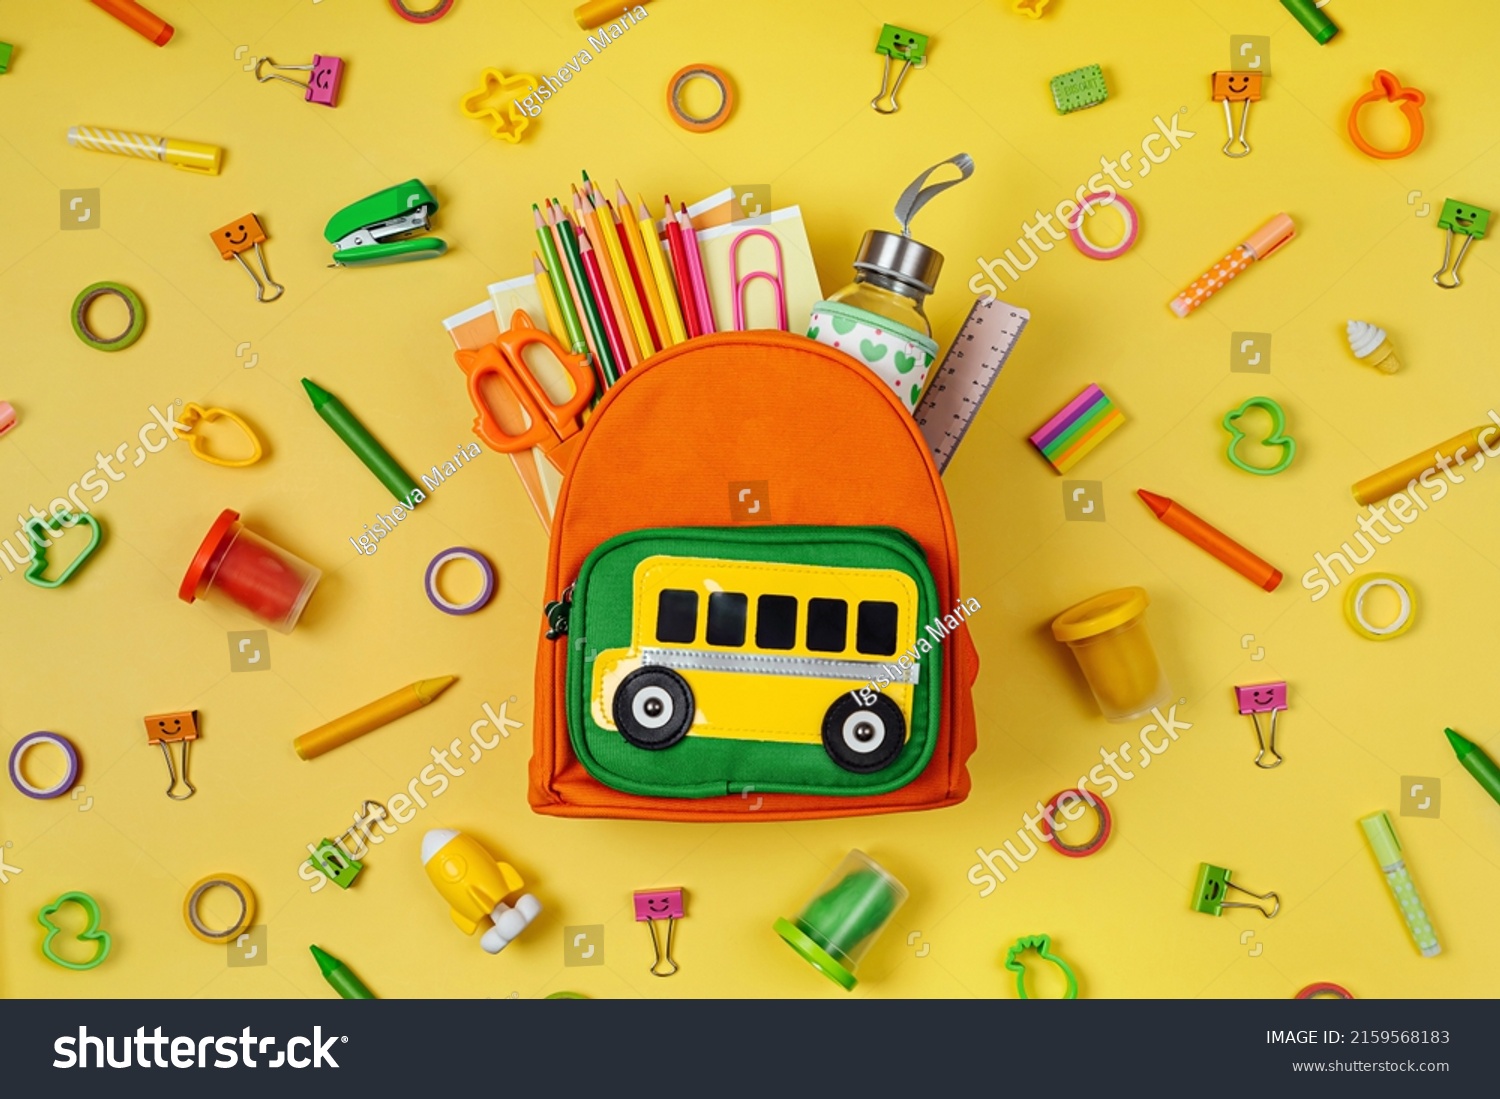 Kids Backpack with school bus on yellow background. Opened School backpack with stationery. Primary School or kindergarten.  #2159568183